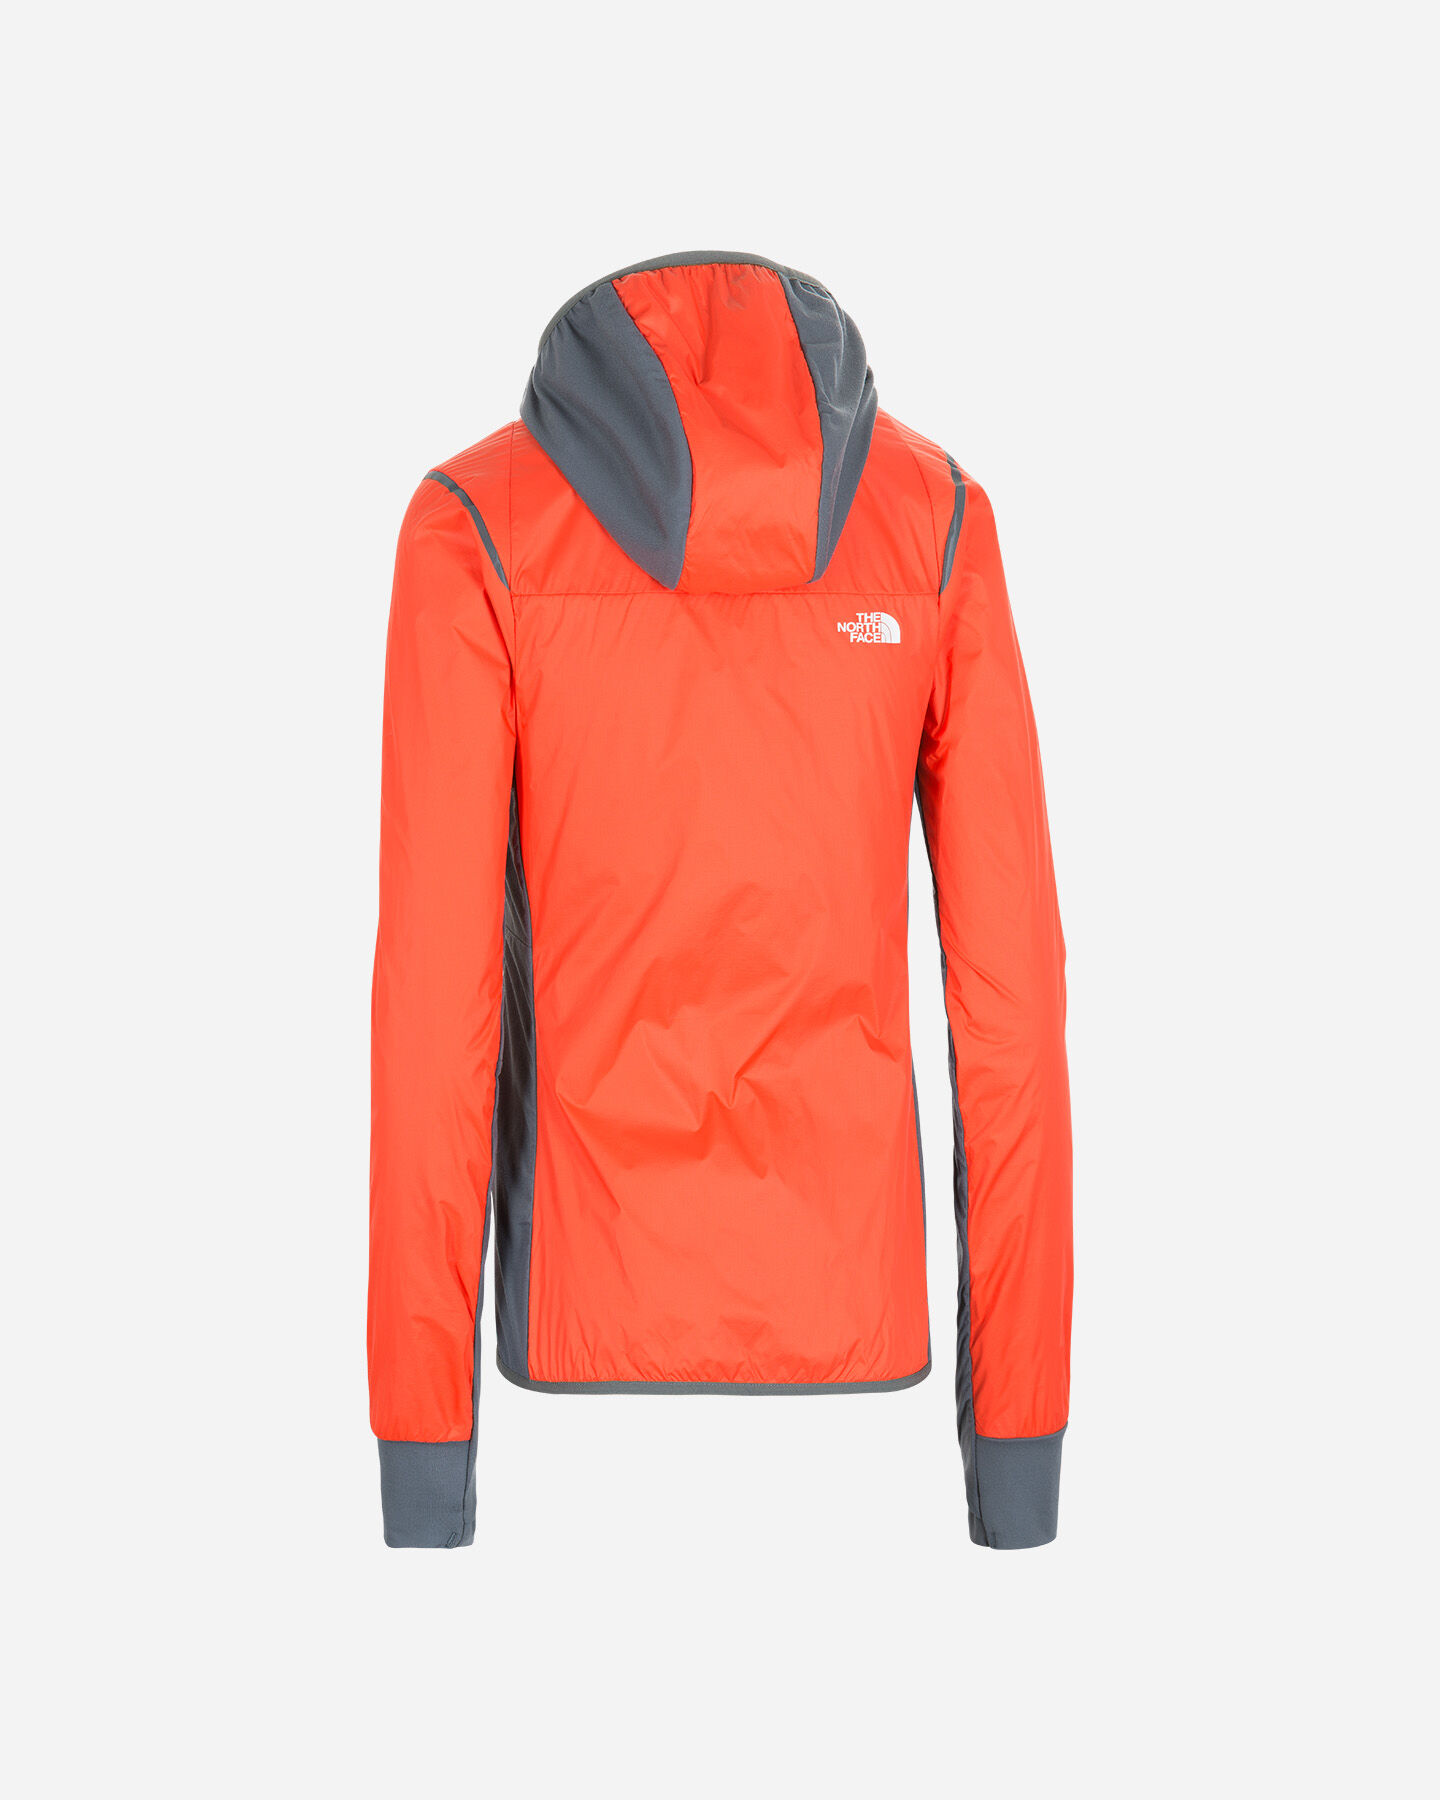  Pile THE NORTH FACE SPEEDTOUR FZ HD W S5243530|U88|XS scatto 1